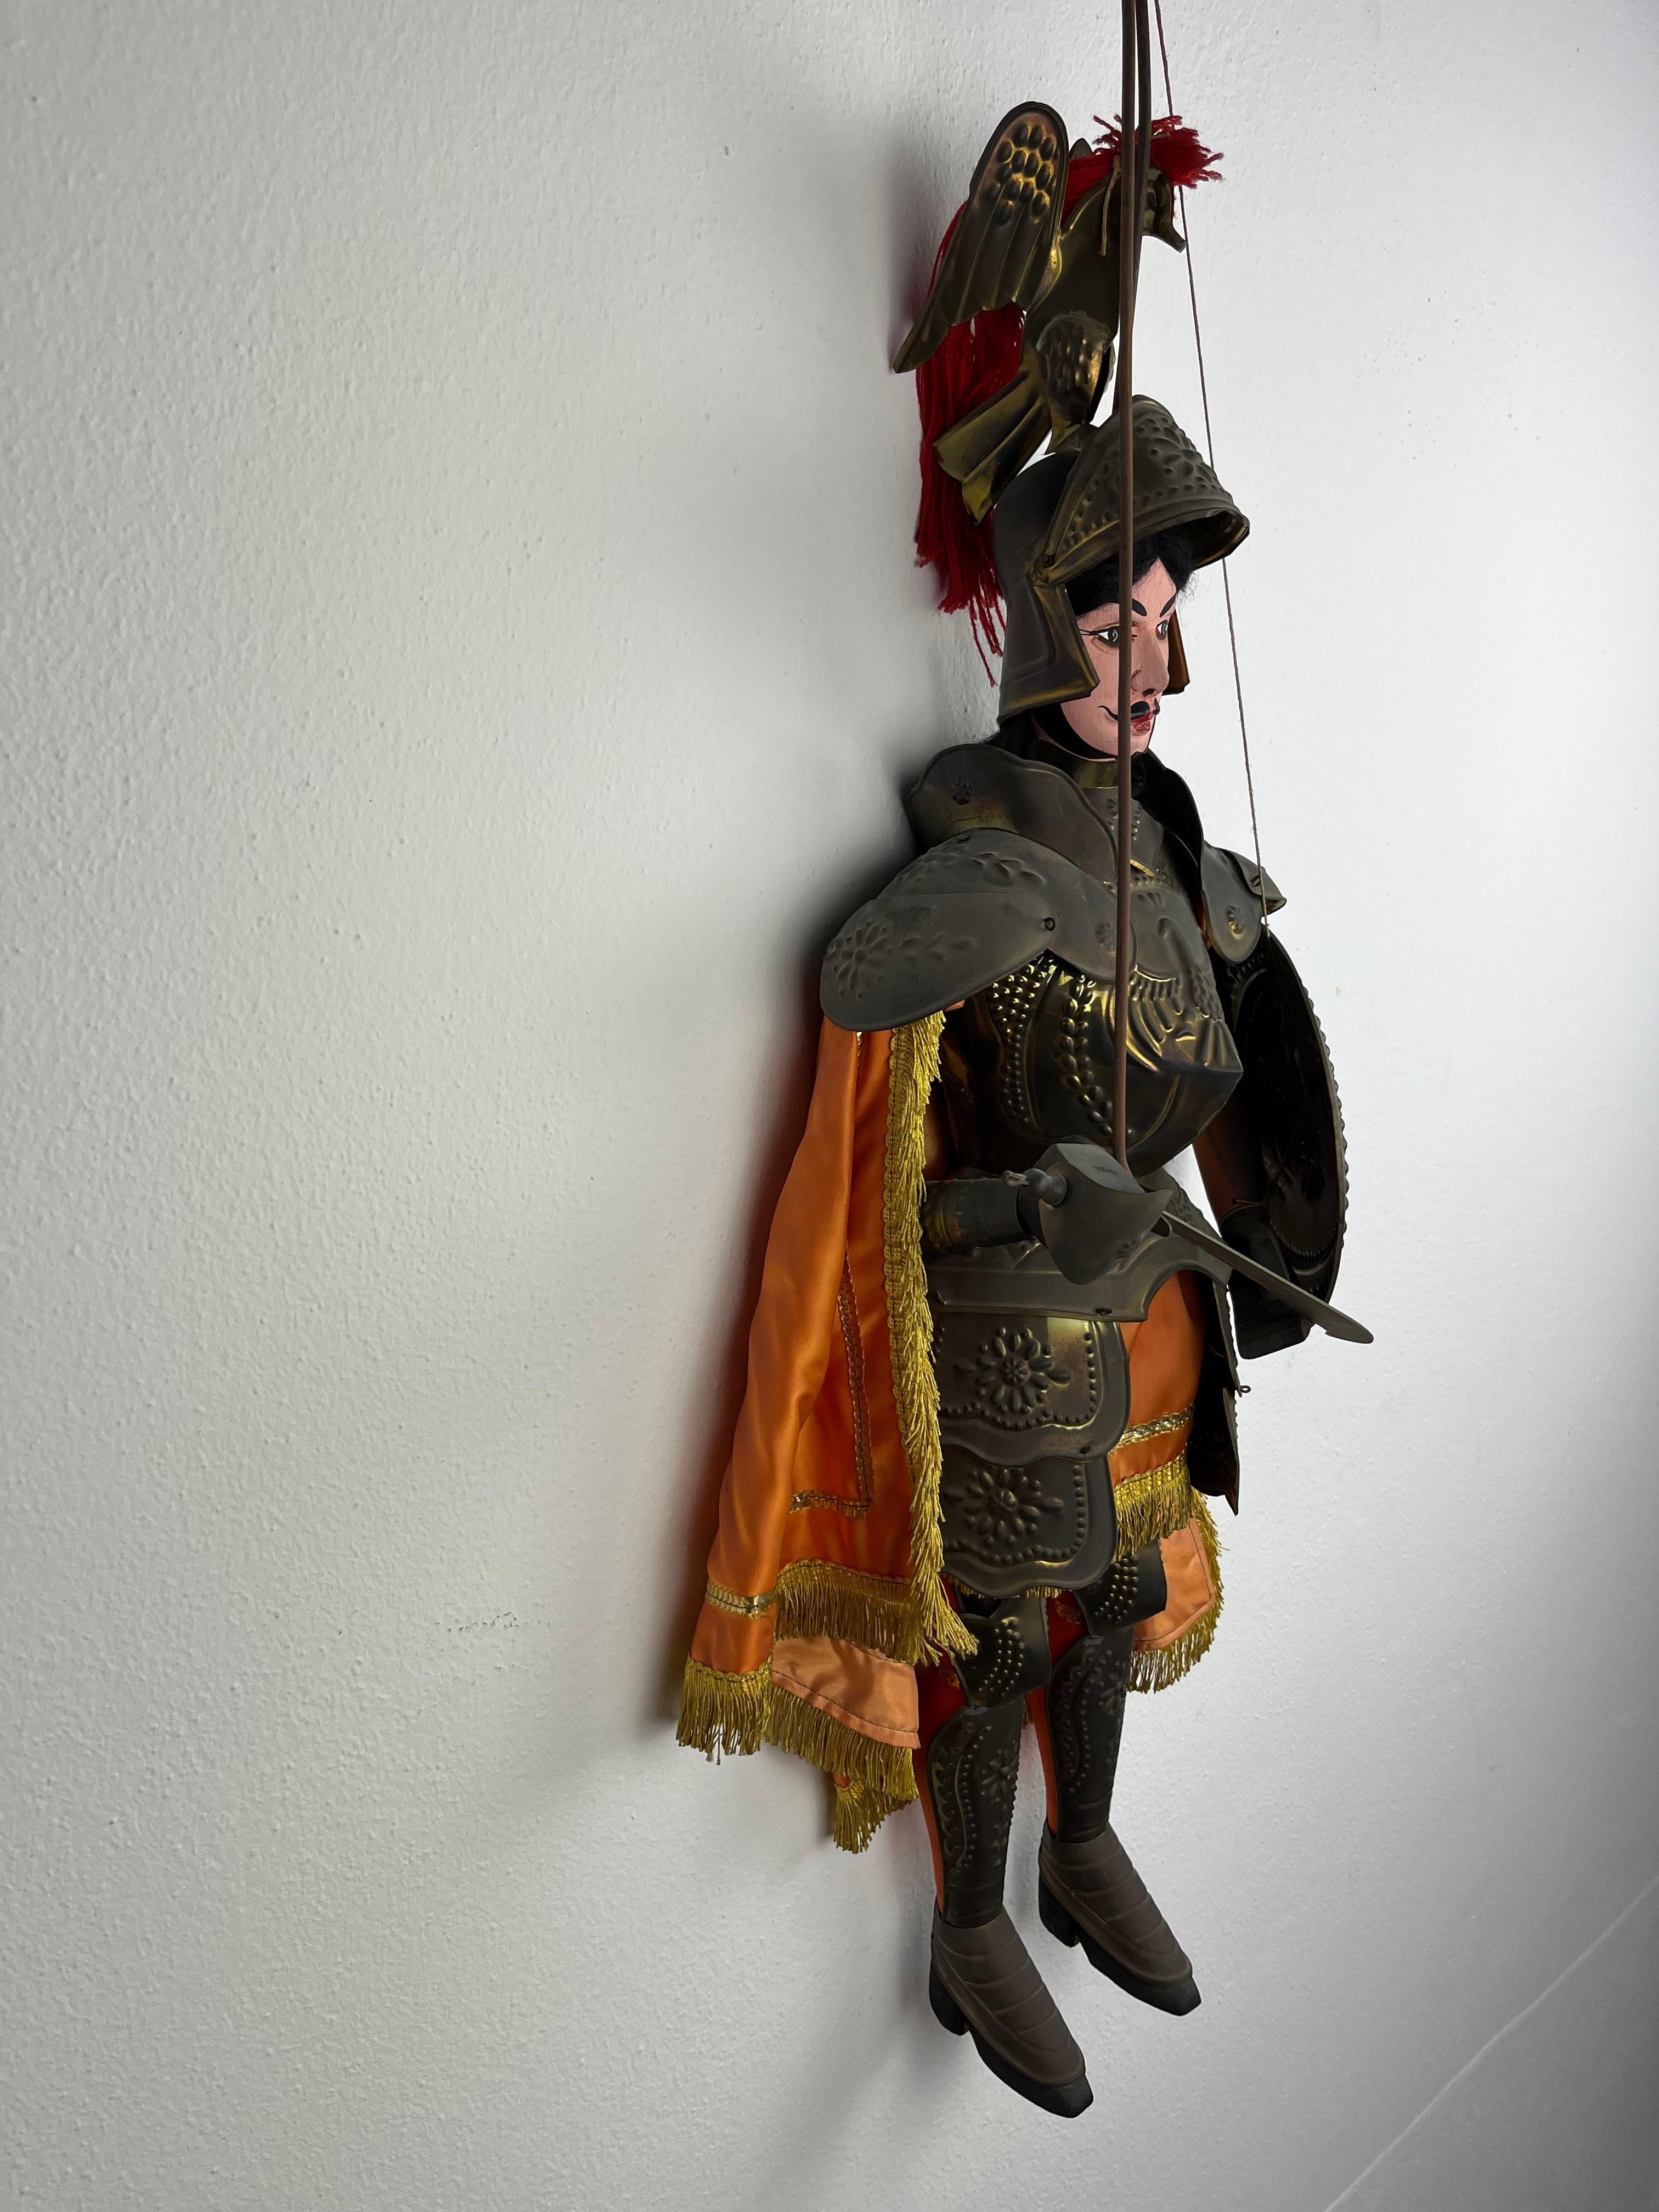 Ancient Sicilian puppet, 1940s.
74 cm tall, the work of a master puppeteer from Palermo. It represents Rinaldo, a fictional character belonging to the Carolingian cycle, one of the twelve paladins of France who make up the chosen guard of the